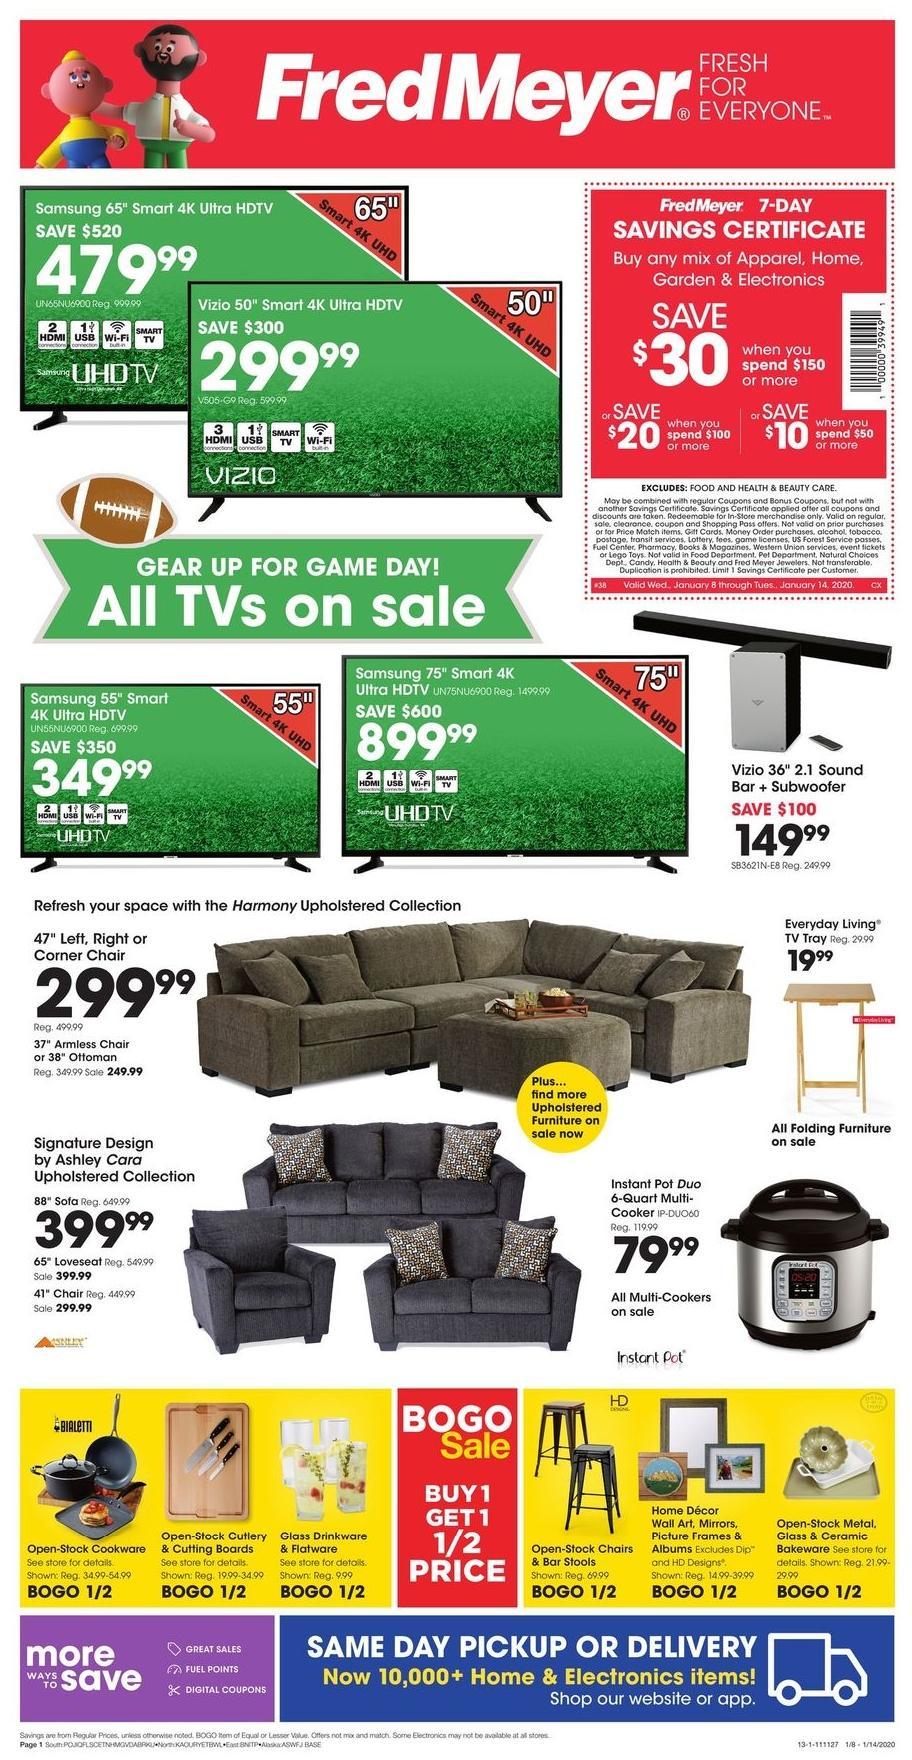 Fred Meyer General Merchandise Weekly Ad from January 8